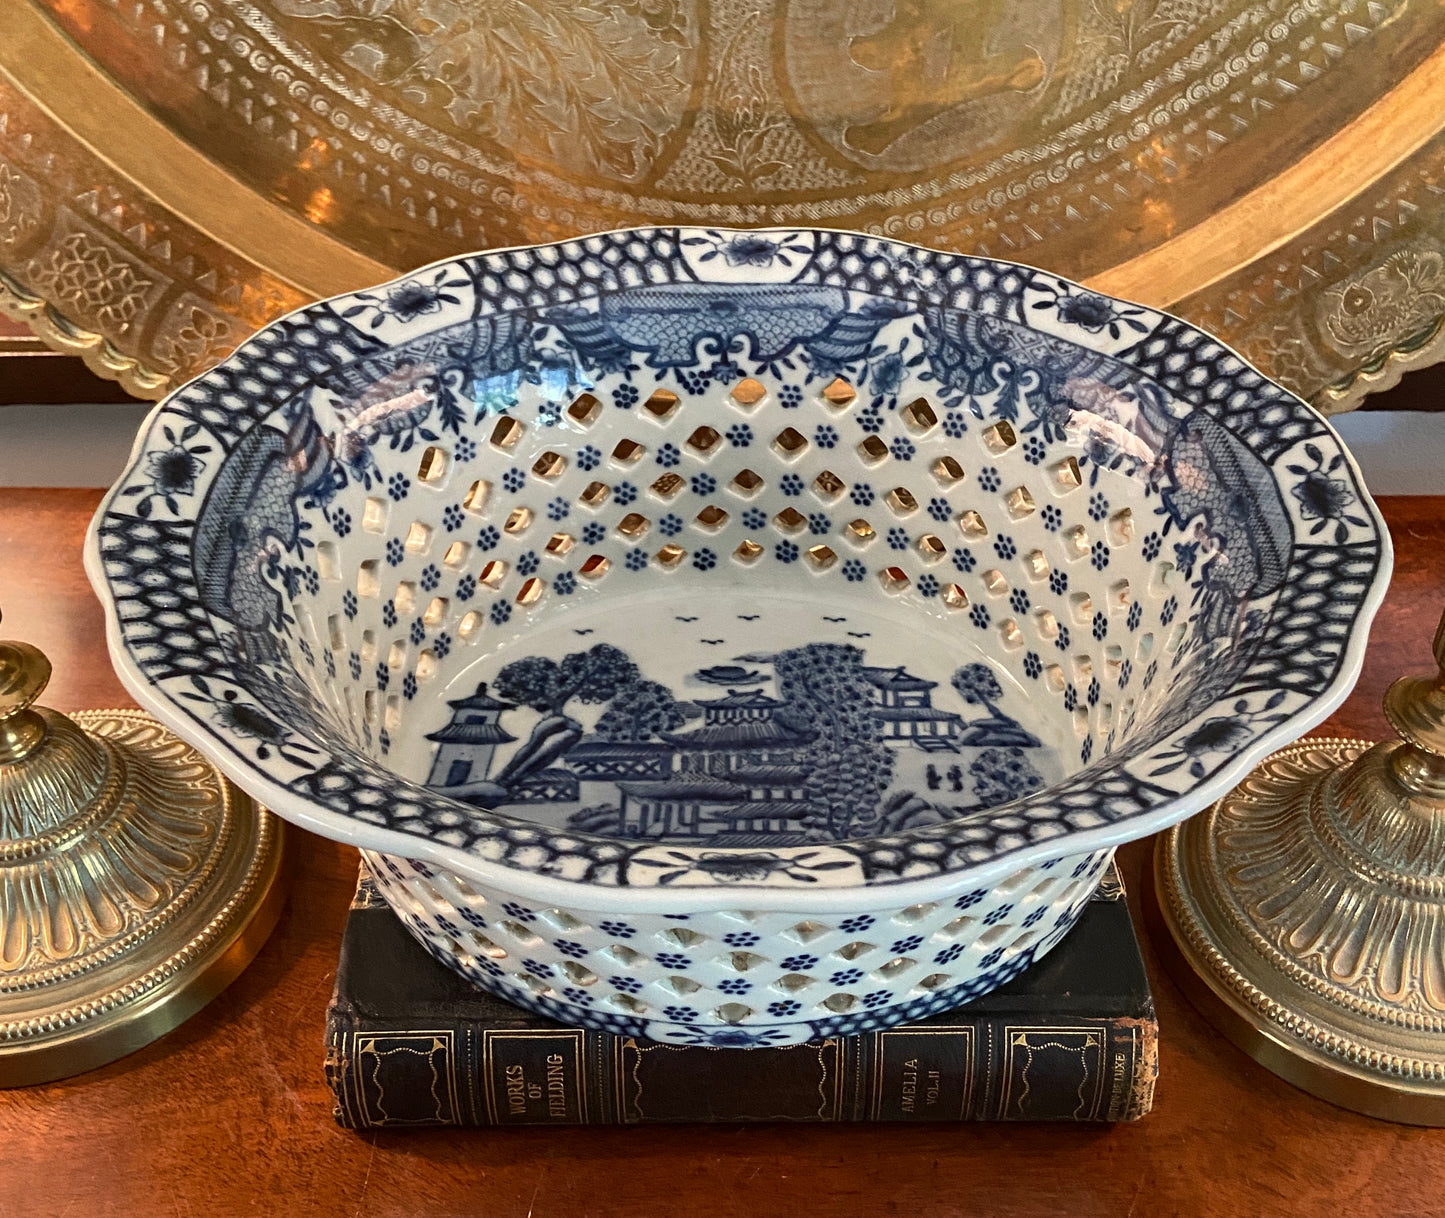 Blue & White Chinoiserie Reticulated Porcelain Basket by United Wilson 1897